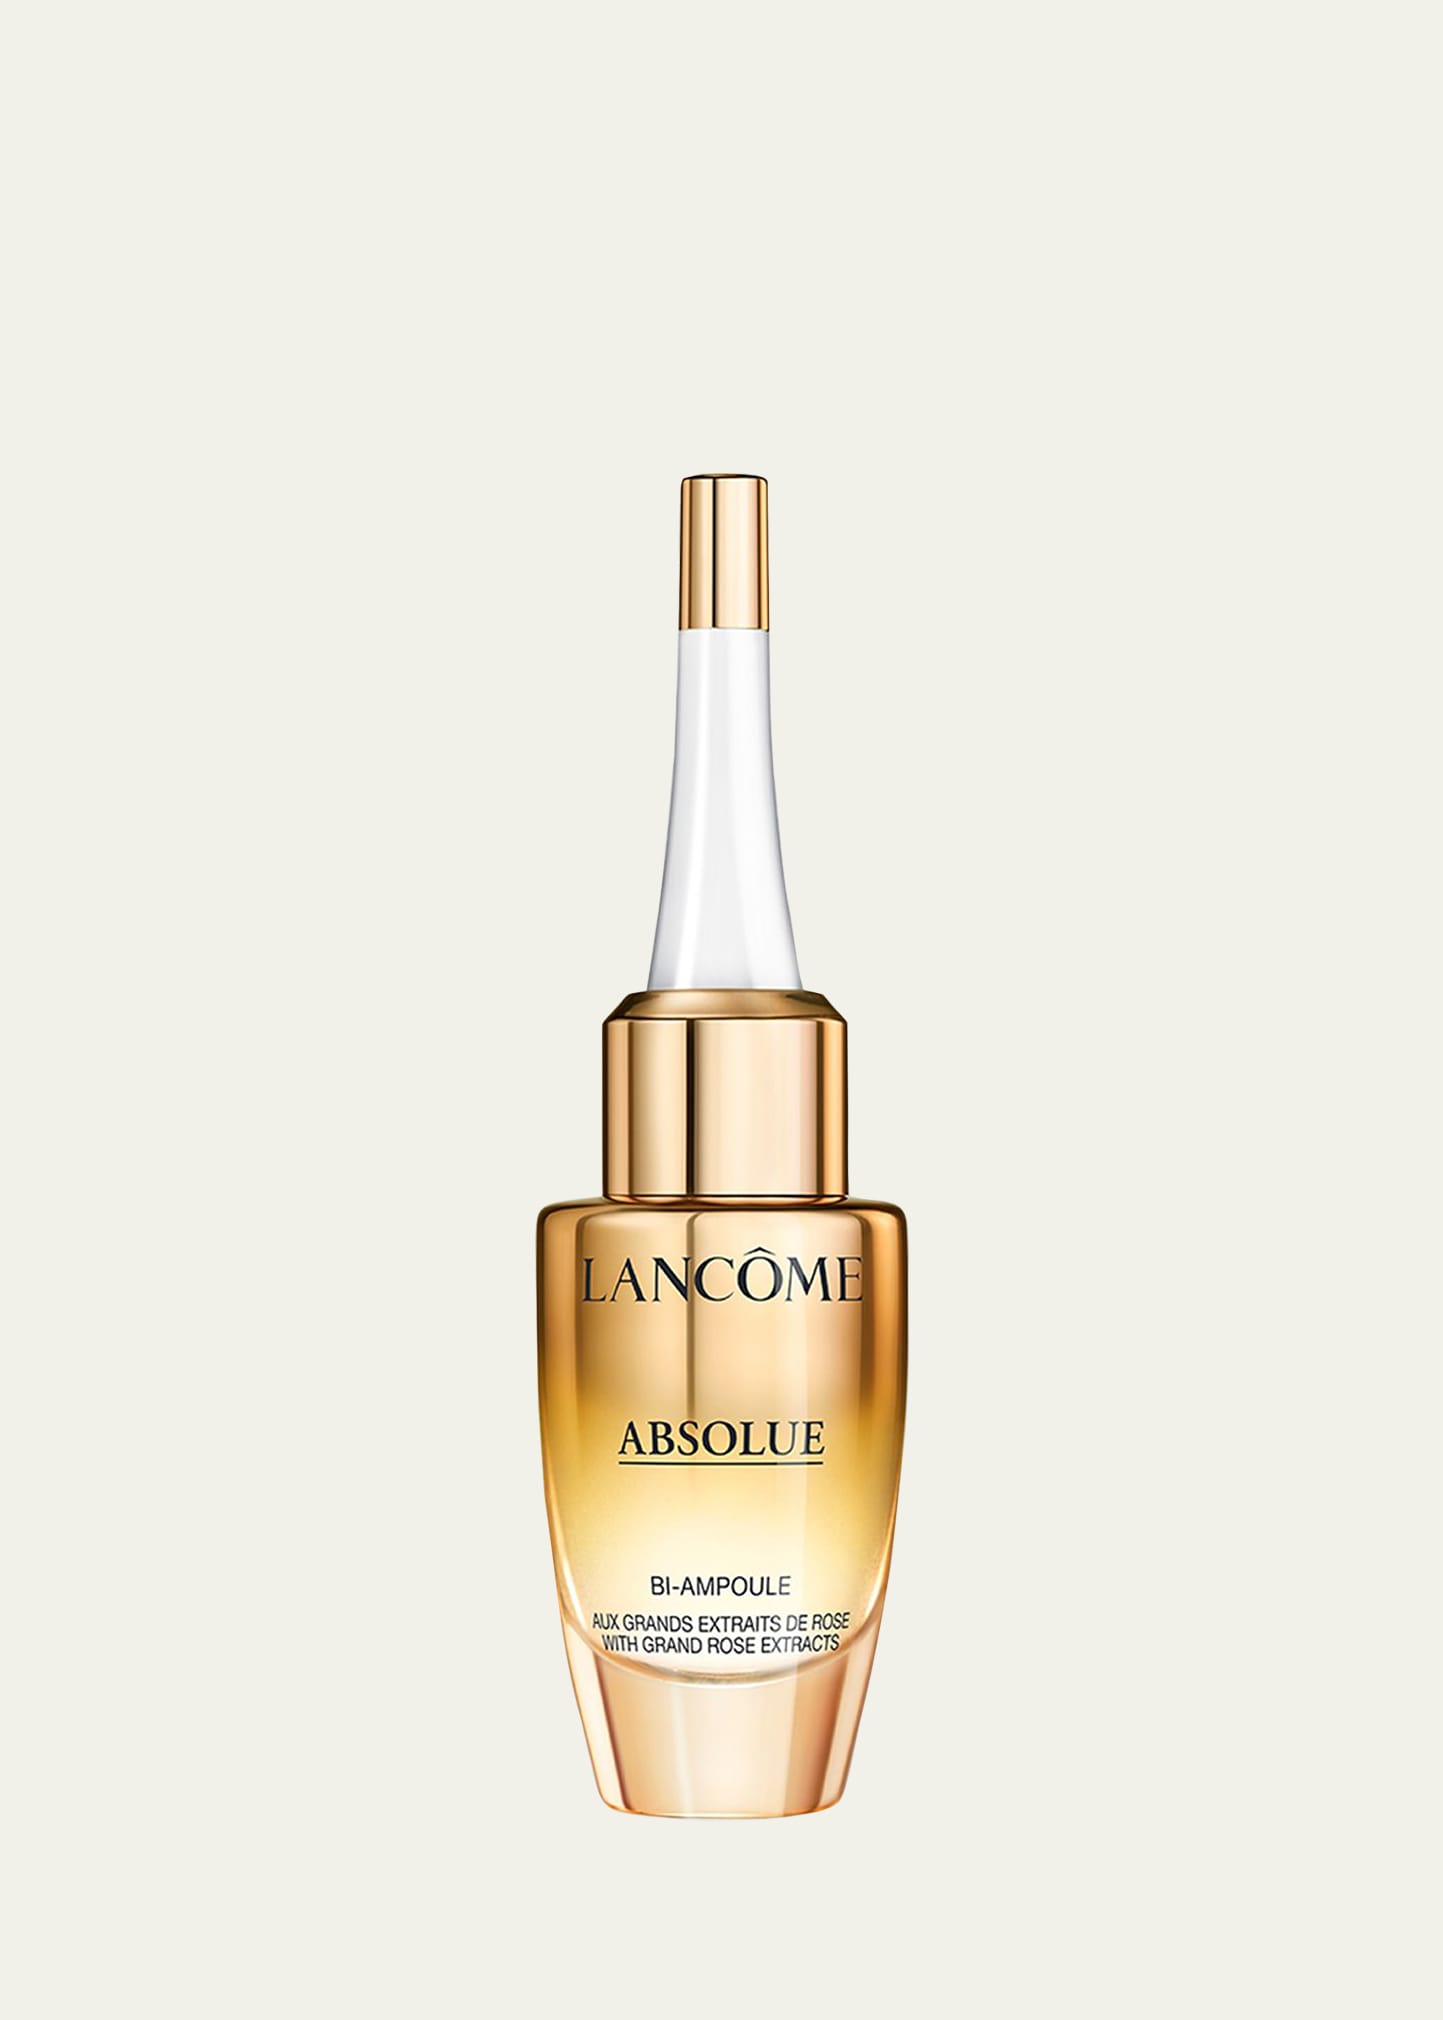 Absolue Overnight Repairing Bi-Ampoule Concentrated Anti-Aging Serum, 0.4 oz.